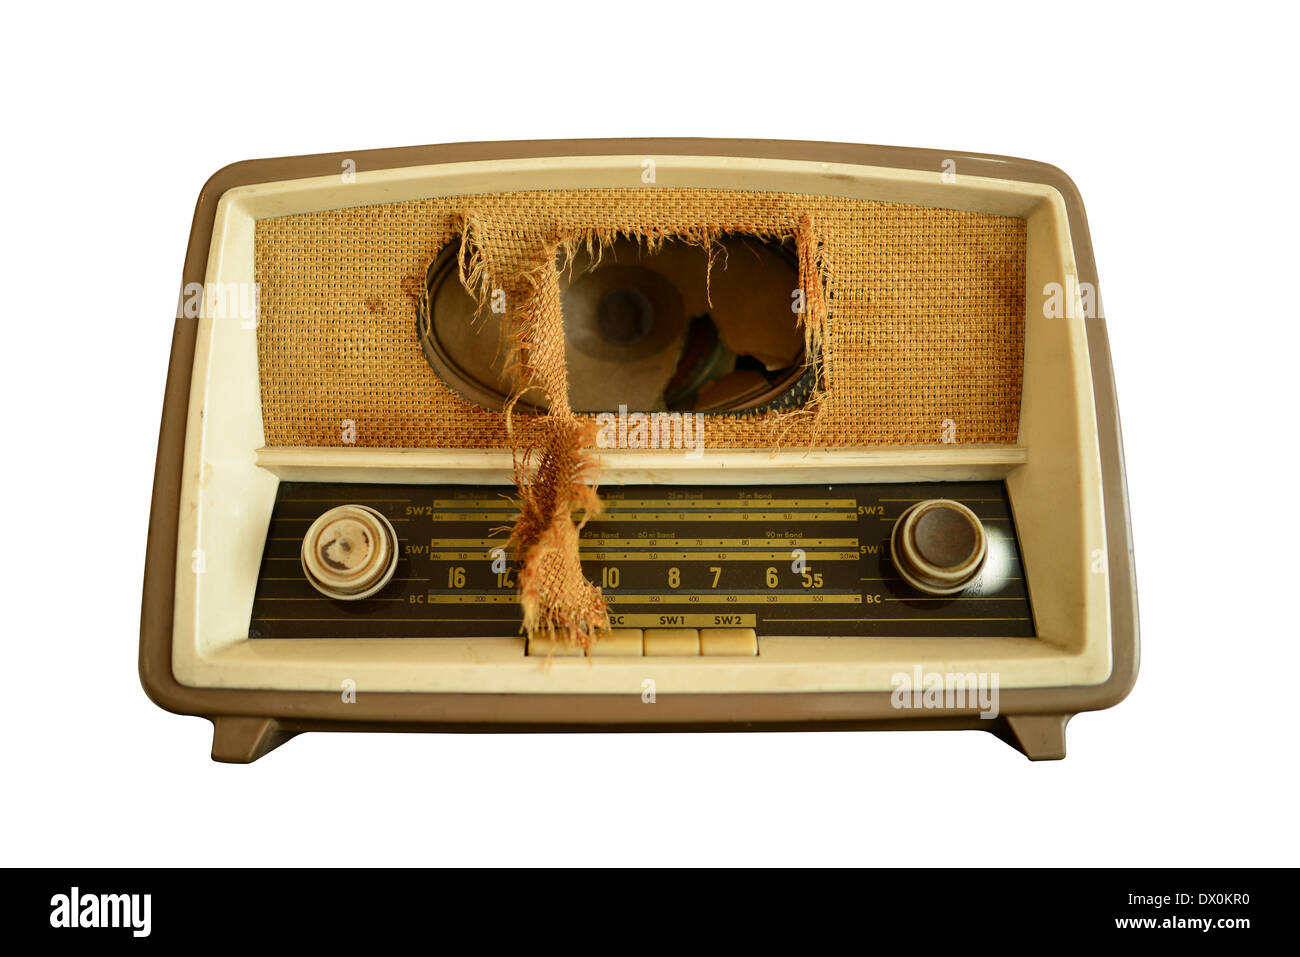 Radio Vintage clipping path Banque D'Images